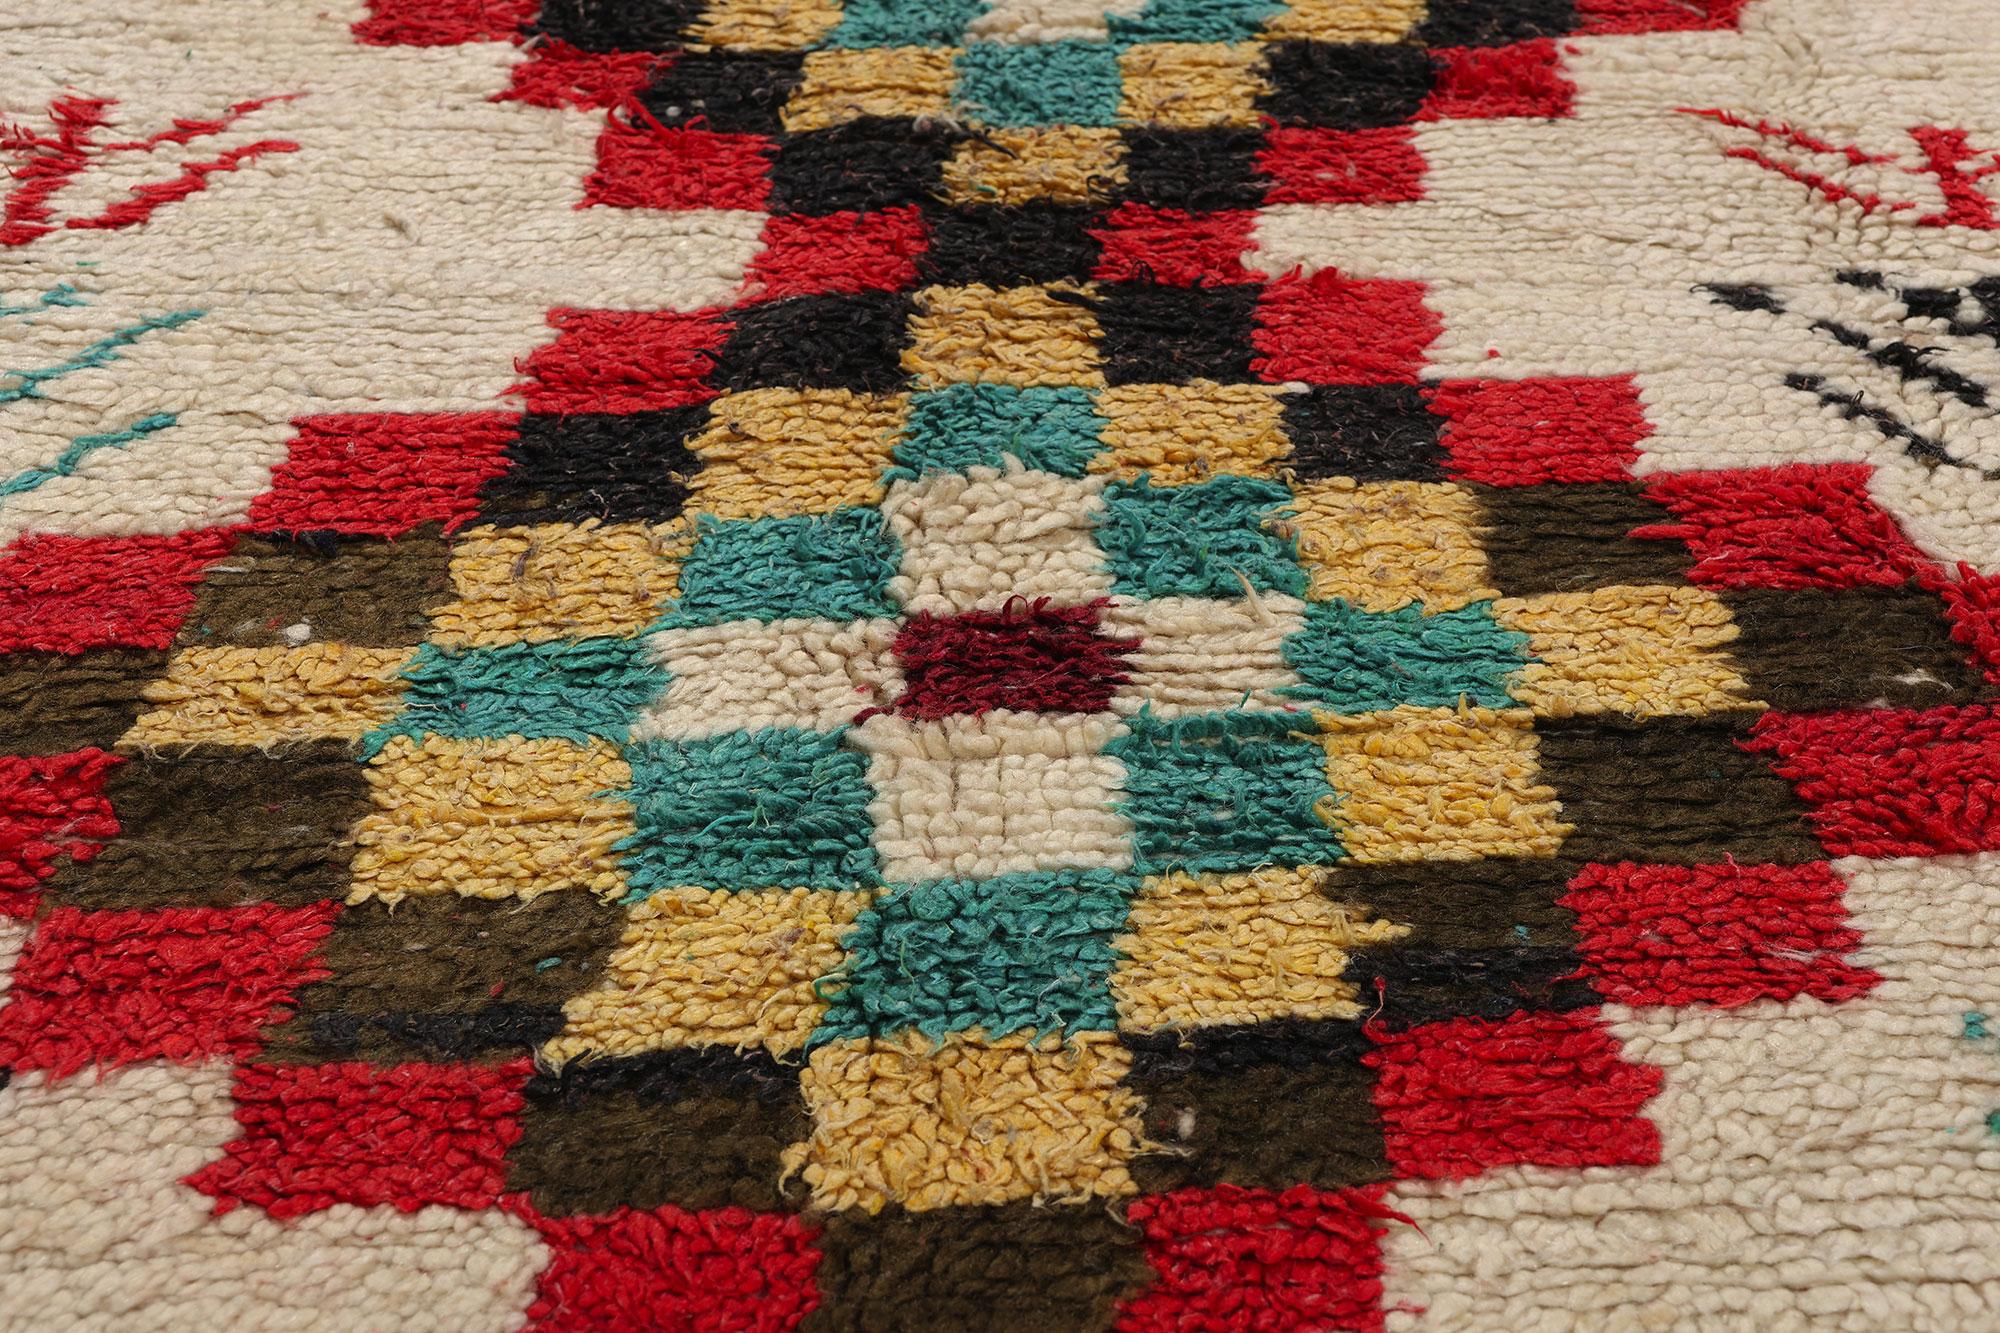 Vintage Berber Moroccan Azilal Rug, Cozy Boho Chic Meets Tribal Enchantment In Good Condition For Sale In Dallas, TX